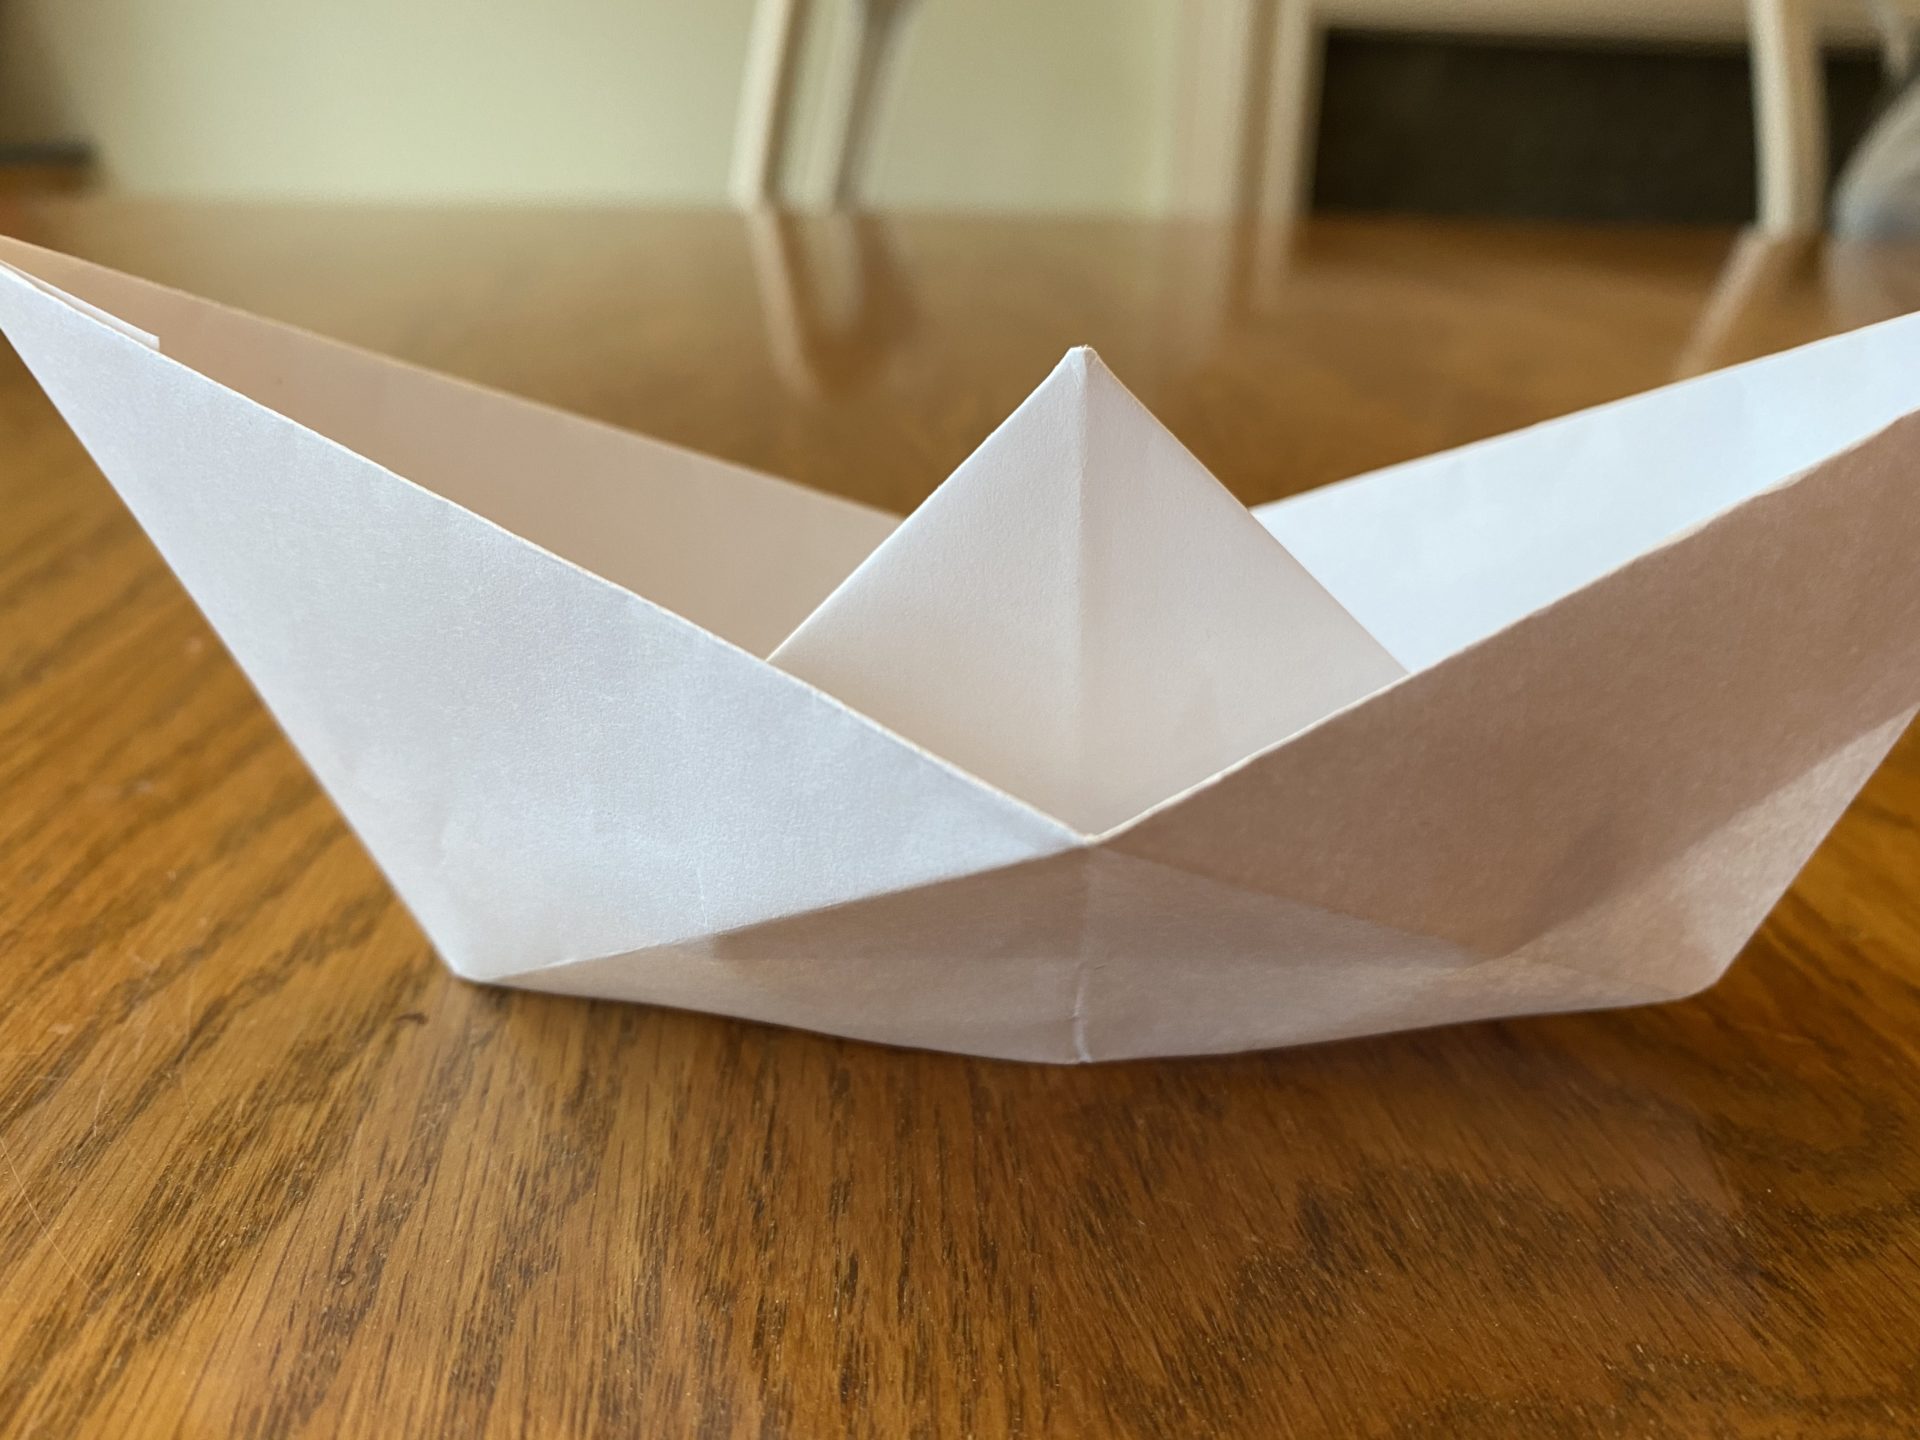 Simple Origami Boat mYeBEAT